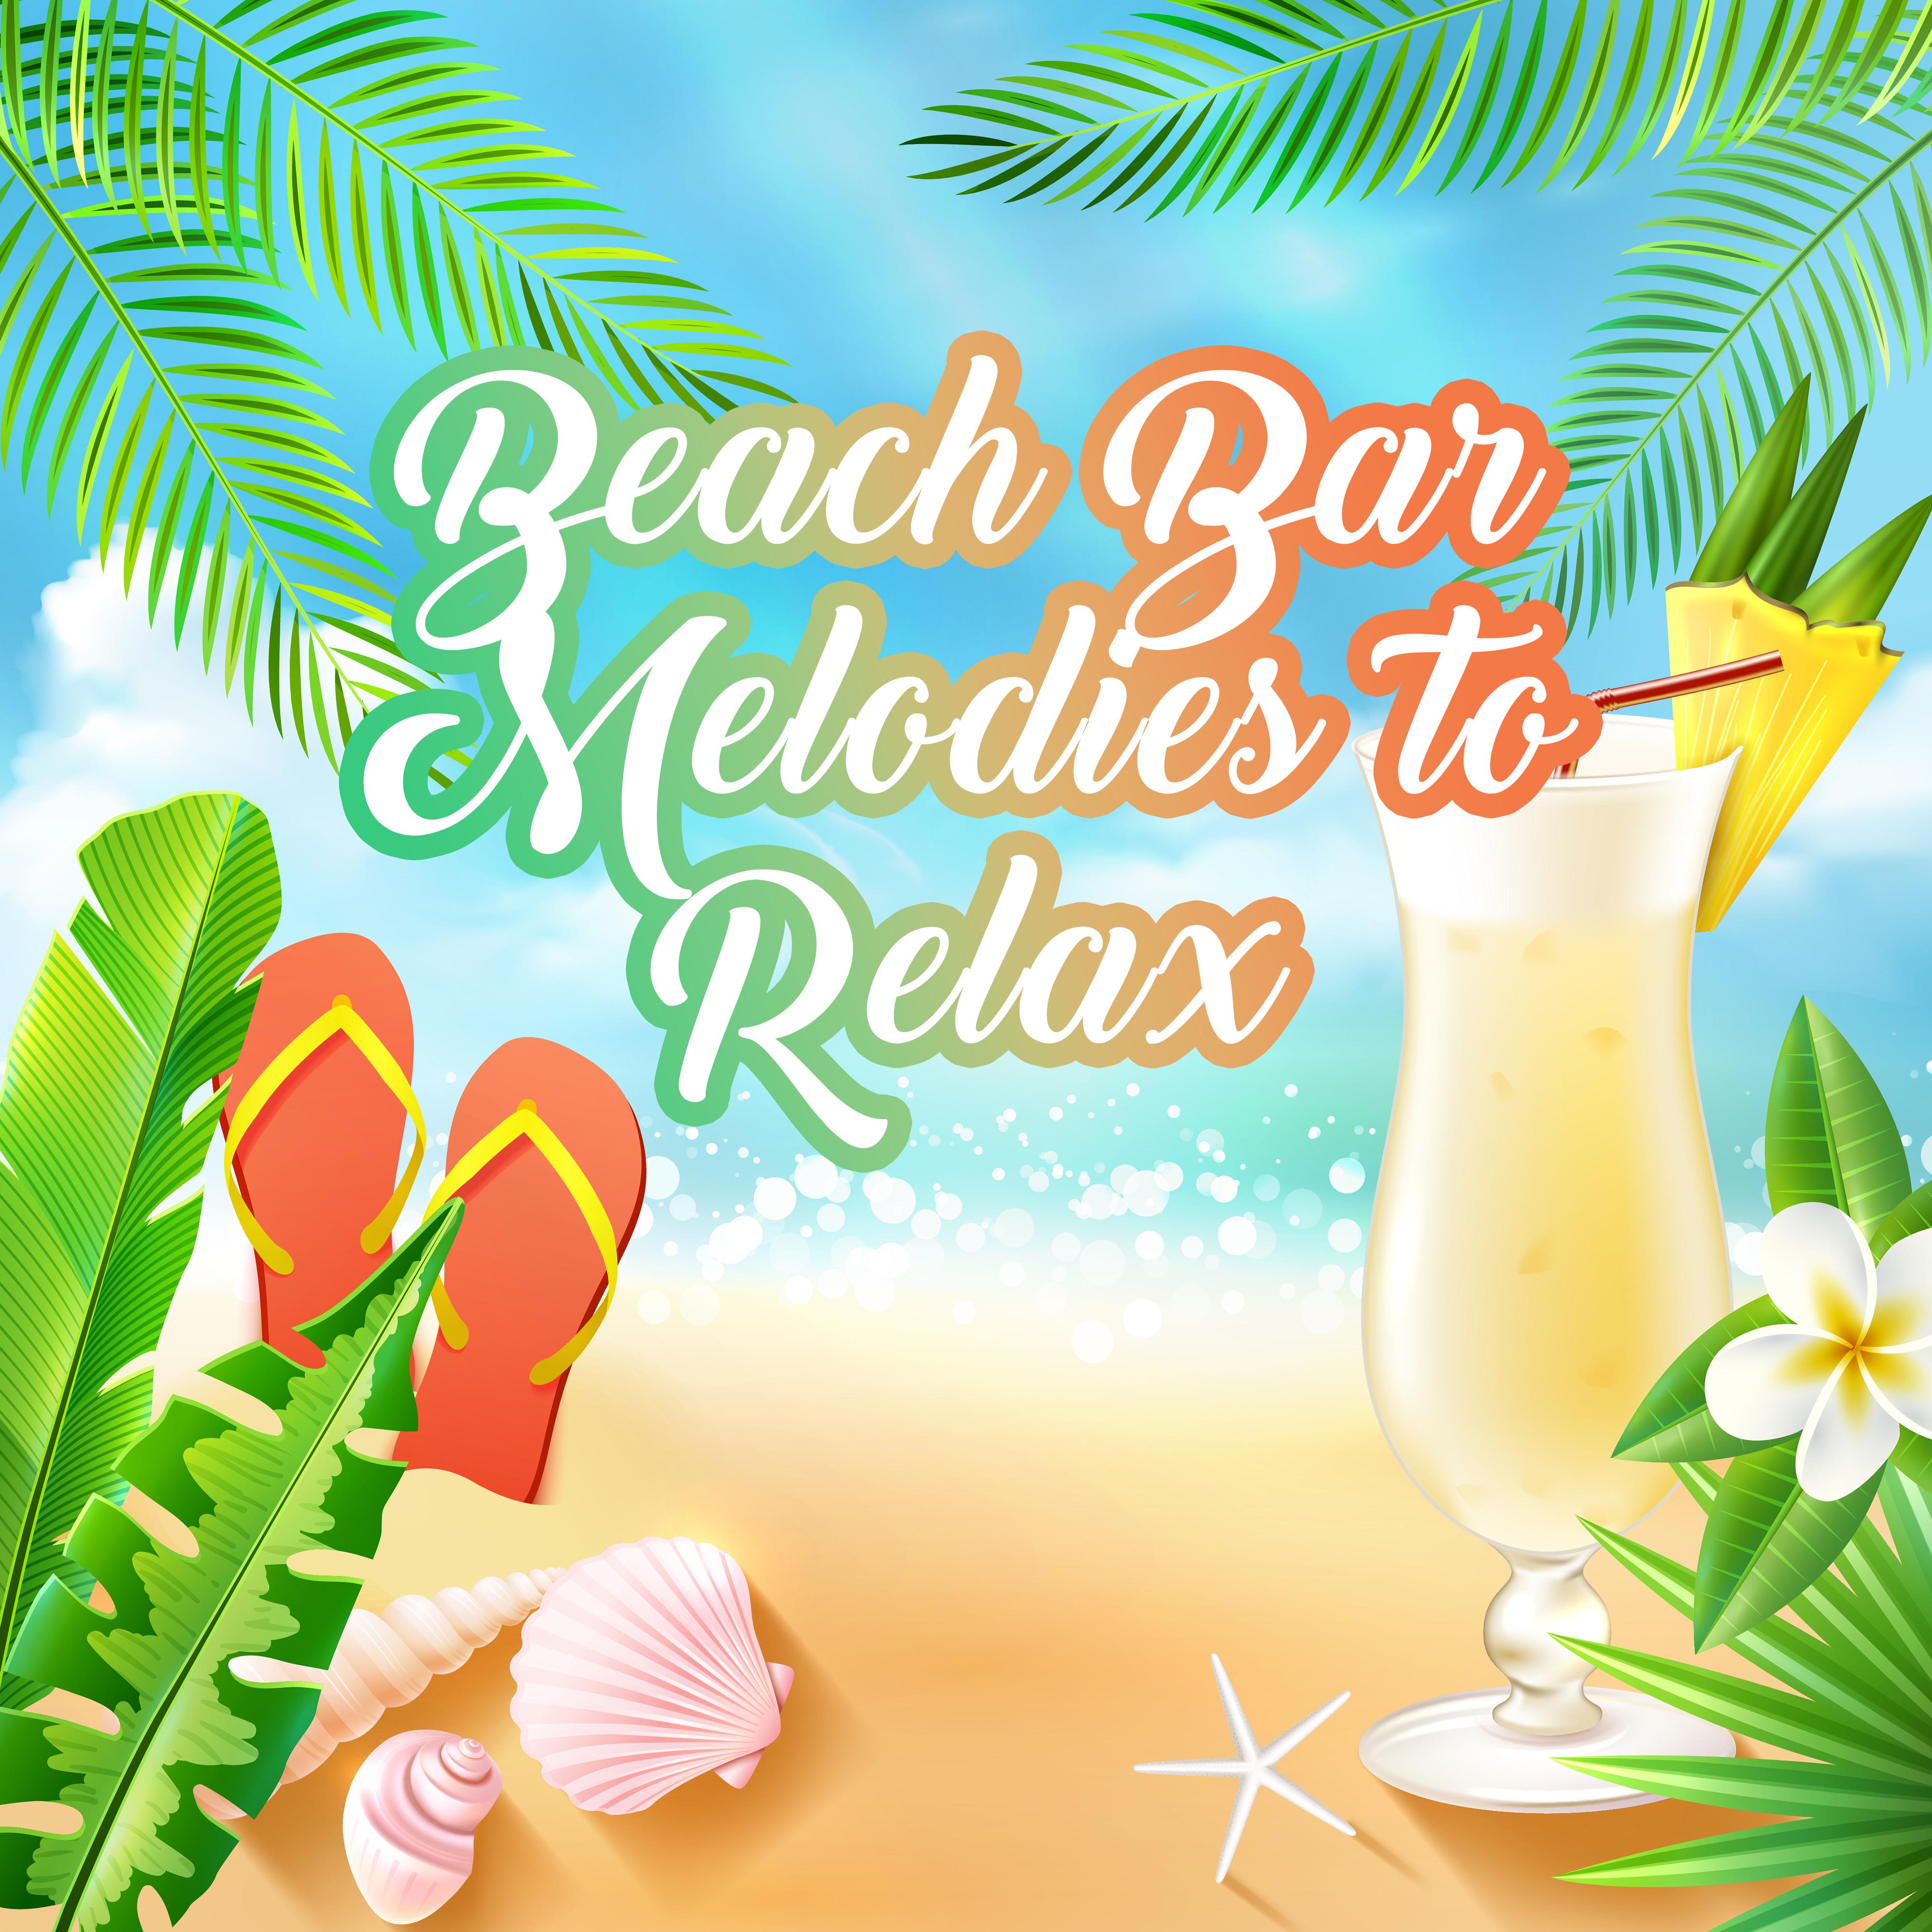 Beach Bar Melodies to Relax